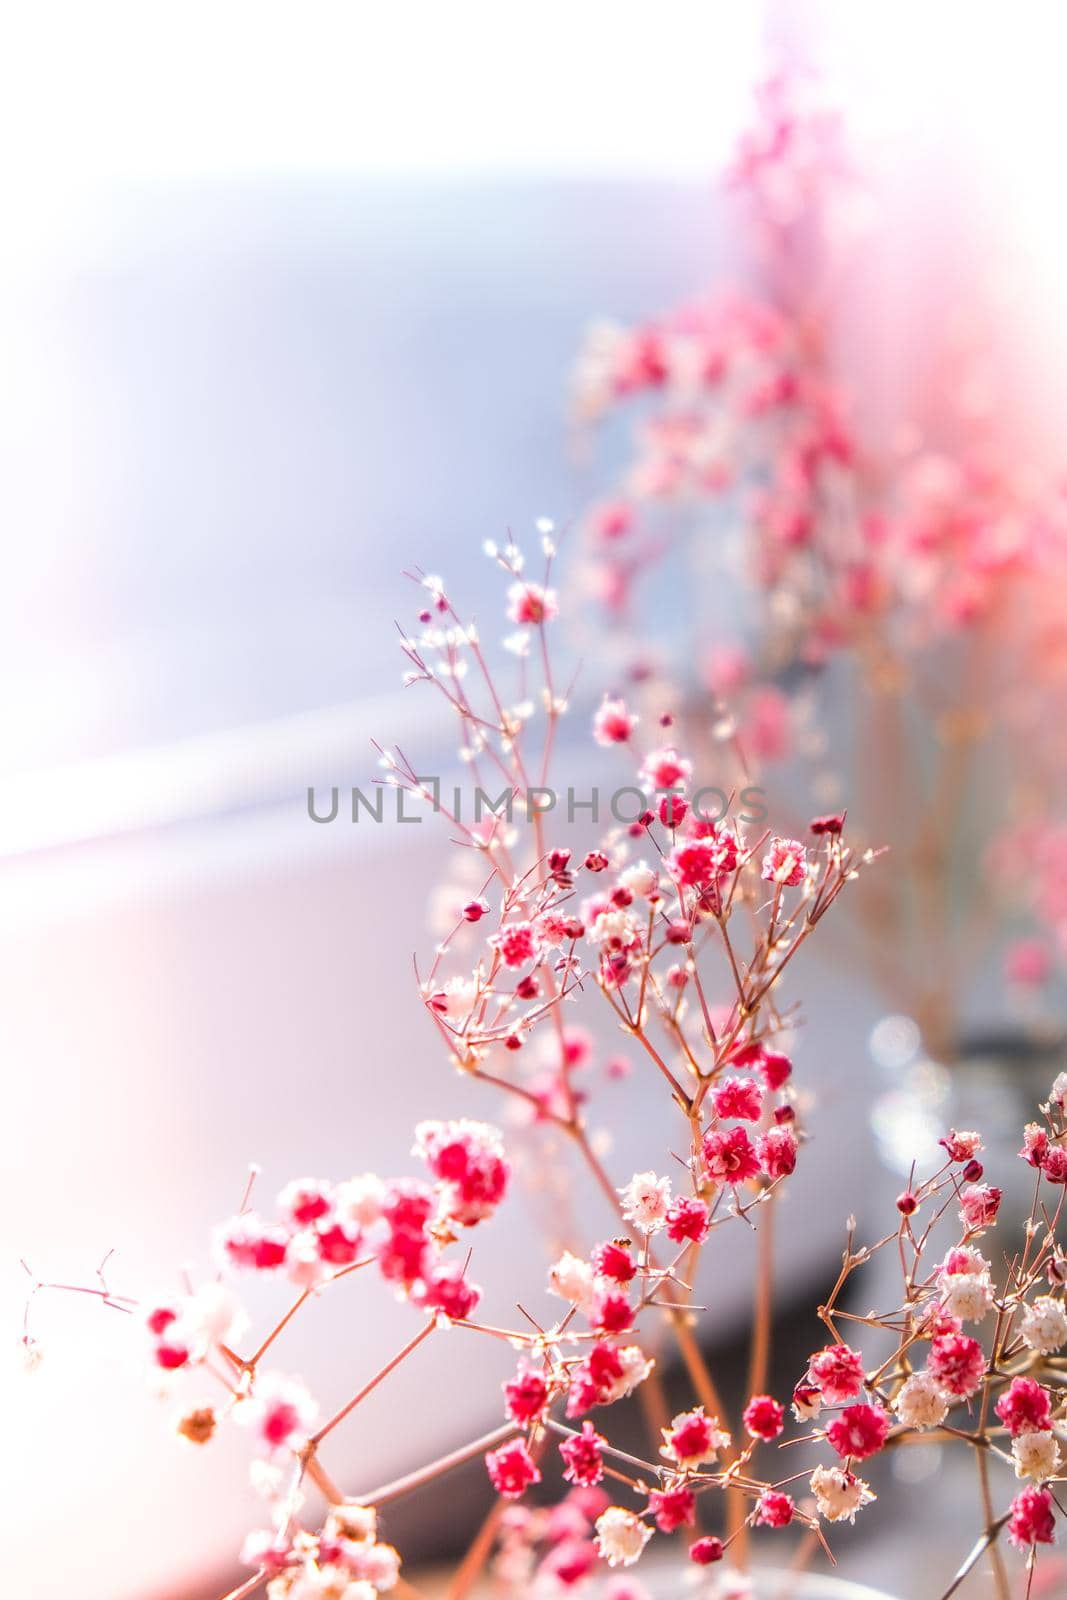 Gypsophila or baby's breath flowers Beautiful pink flower blooming with soft light. Selective focus. Spring holiday card background. Delicate aesthetics. by anna_stasiia